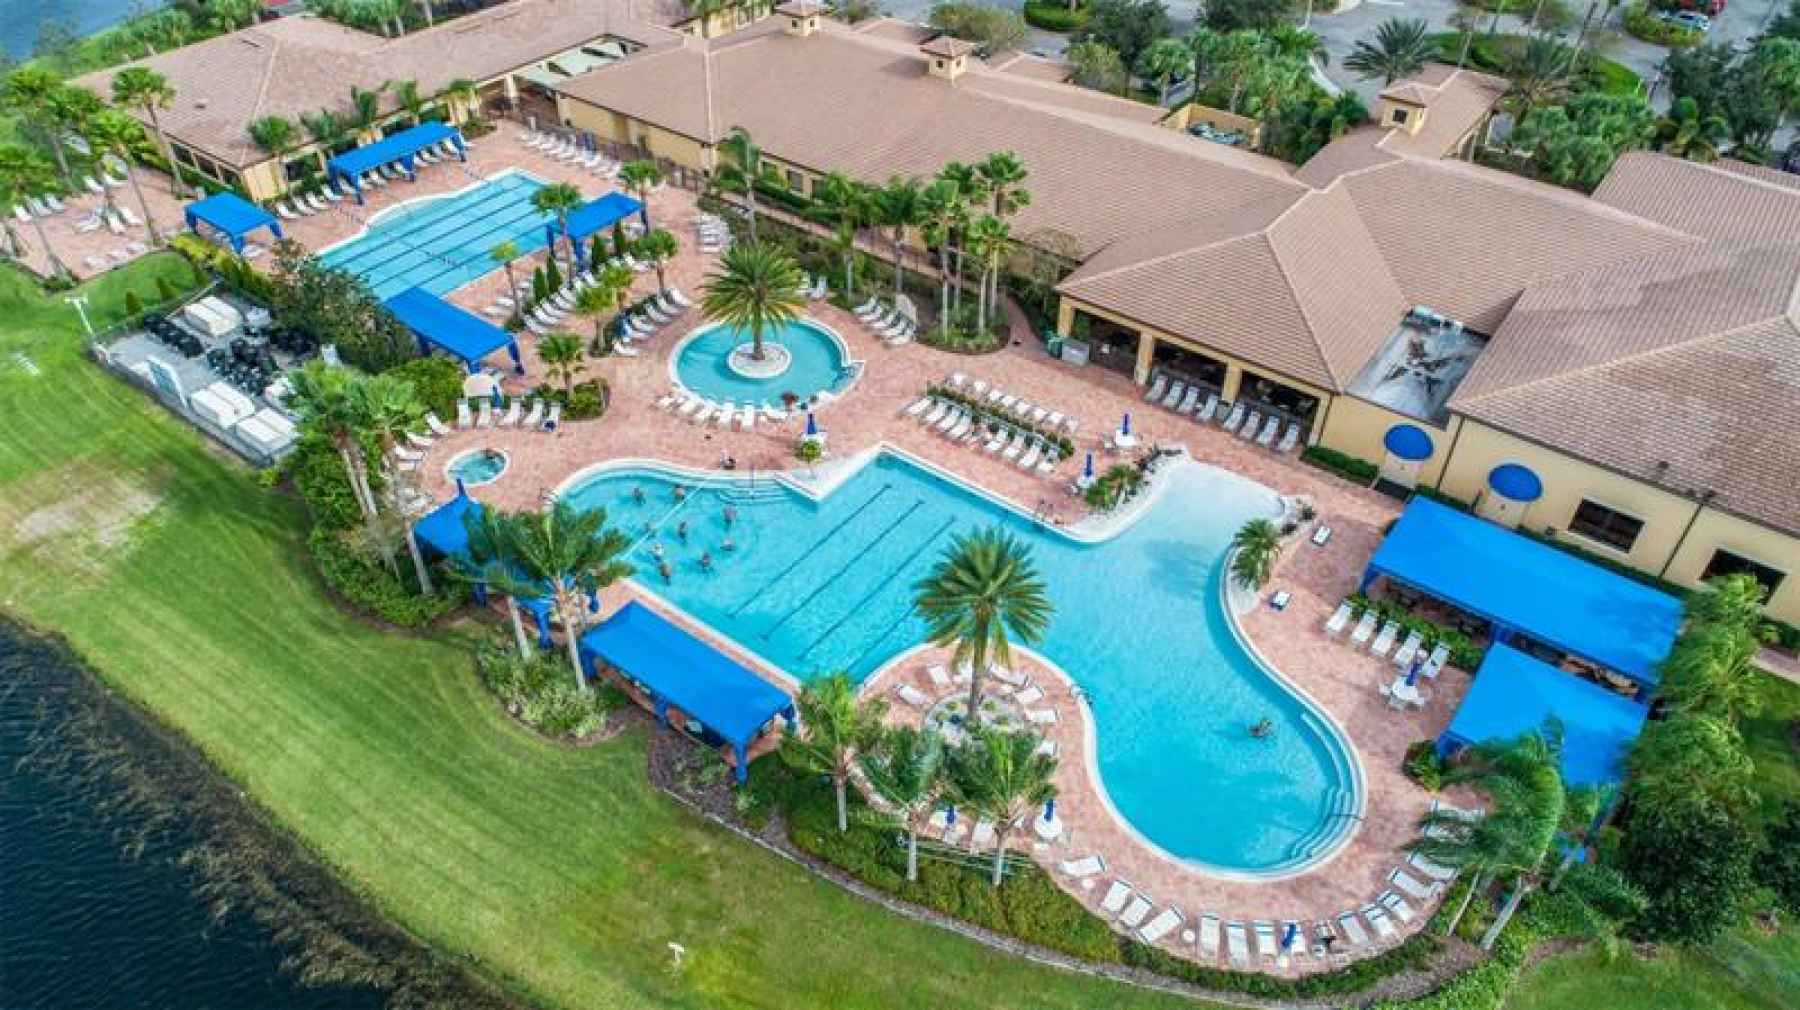 AERIAL VIEW OF 3 POOLS, HOT TUB AND CLUBHOUSE